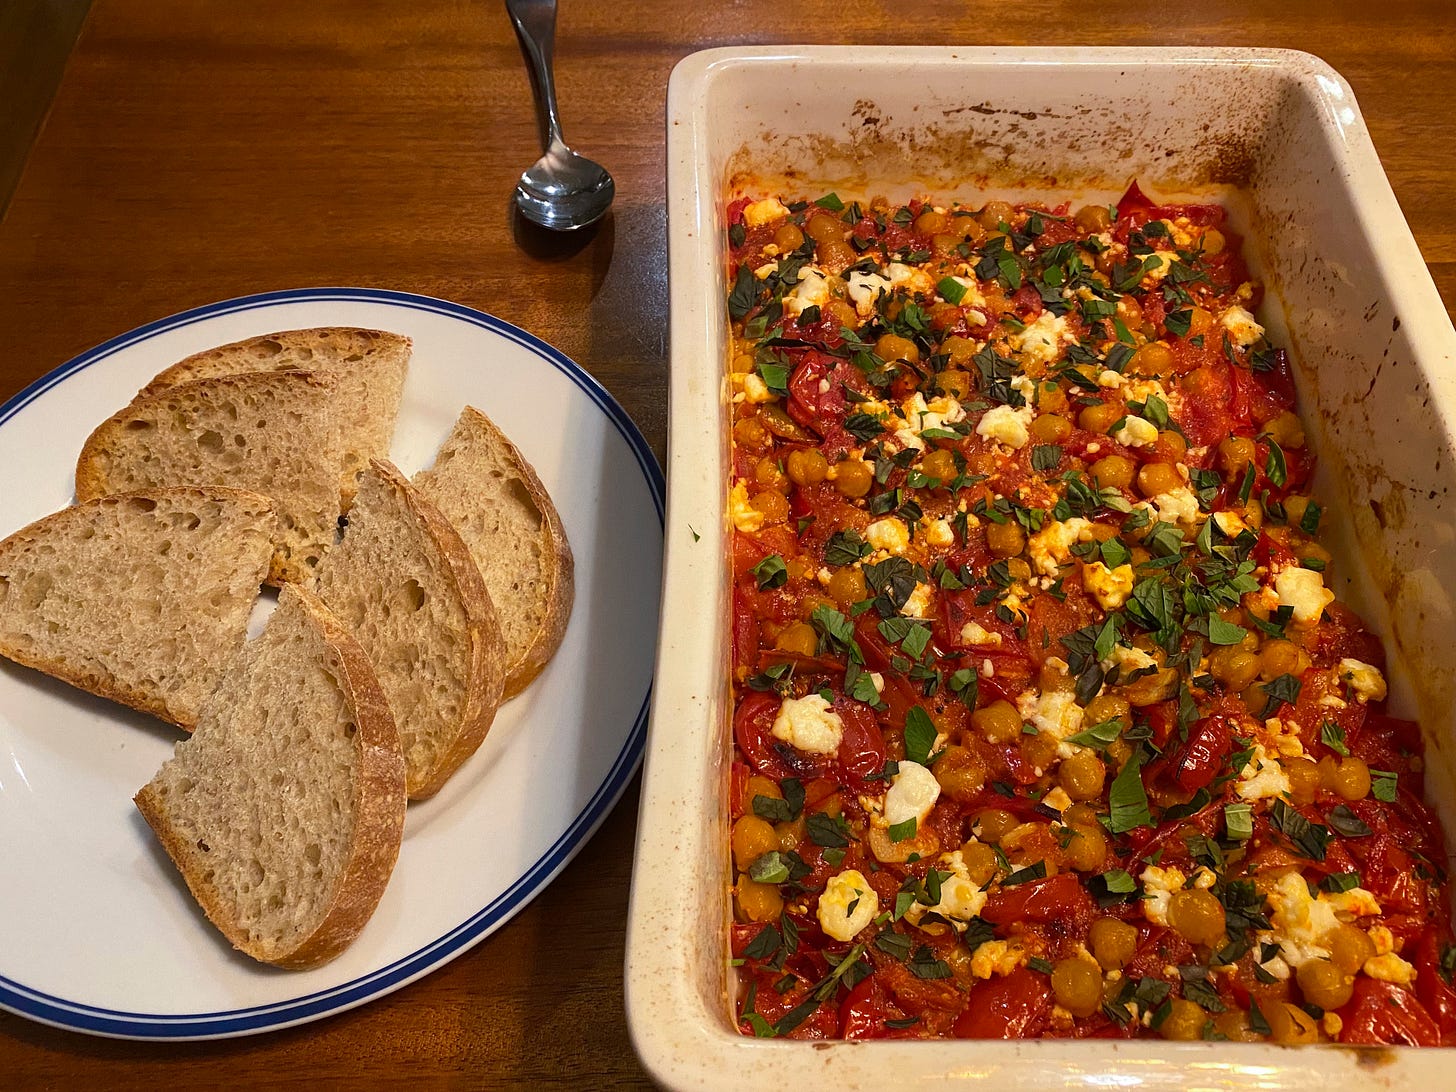 In a white rectangular baking dish, a mixture of baked chickpeas and diced tomatoes, covered with large crumbles of feta and chopped fresh herbs. To the left of it is a plate with three slices of sourdough cut in half.